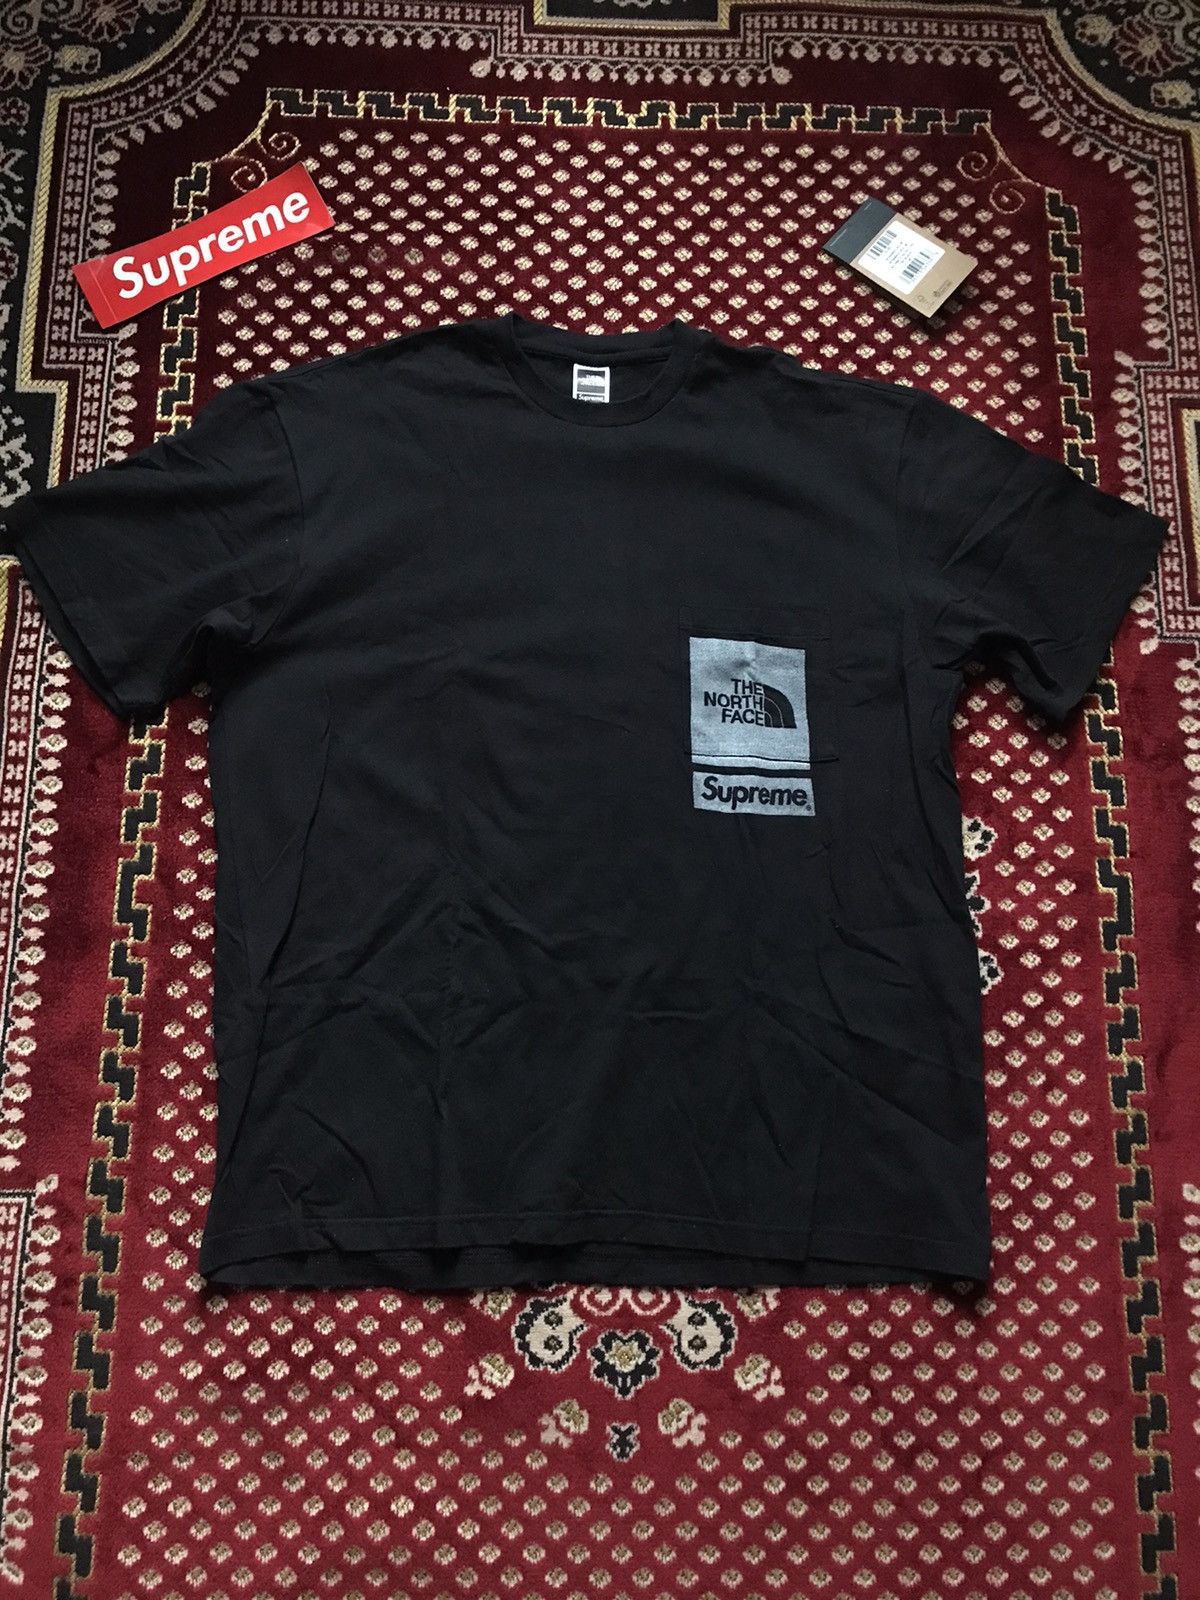 Deadstock Supreme x The North Face Mountain T Shirt White Medium IN HAND!